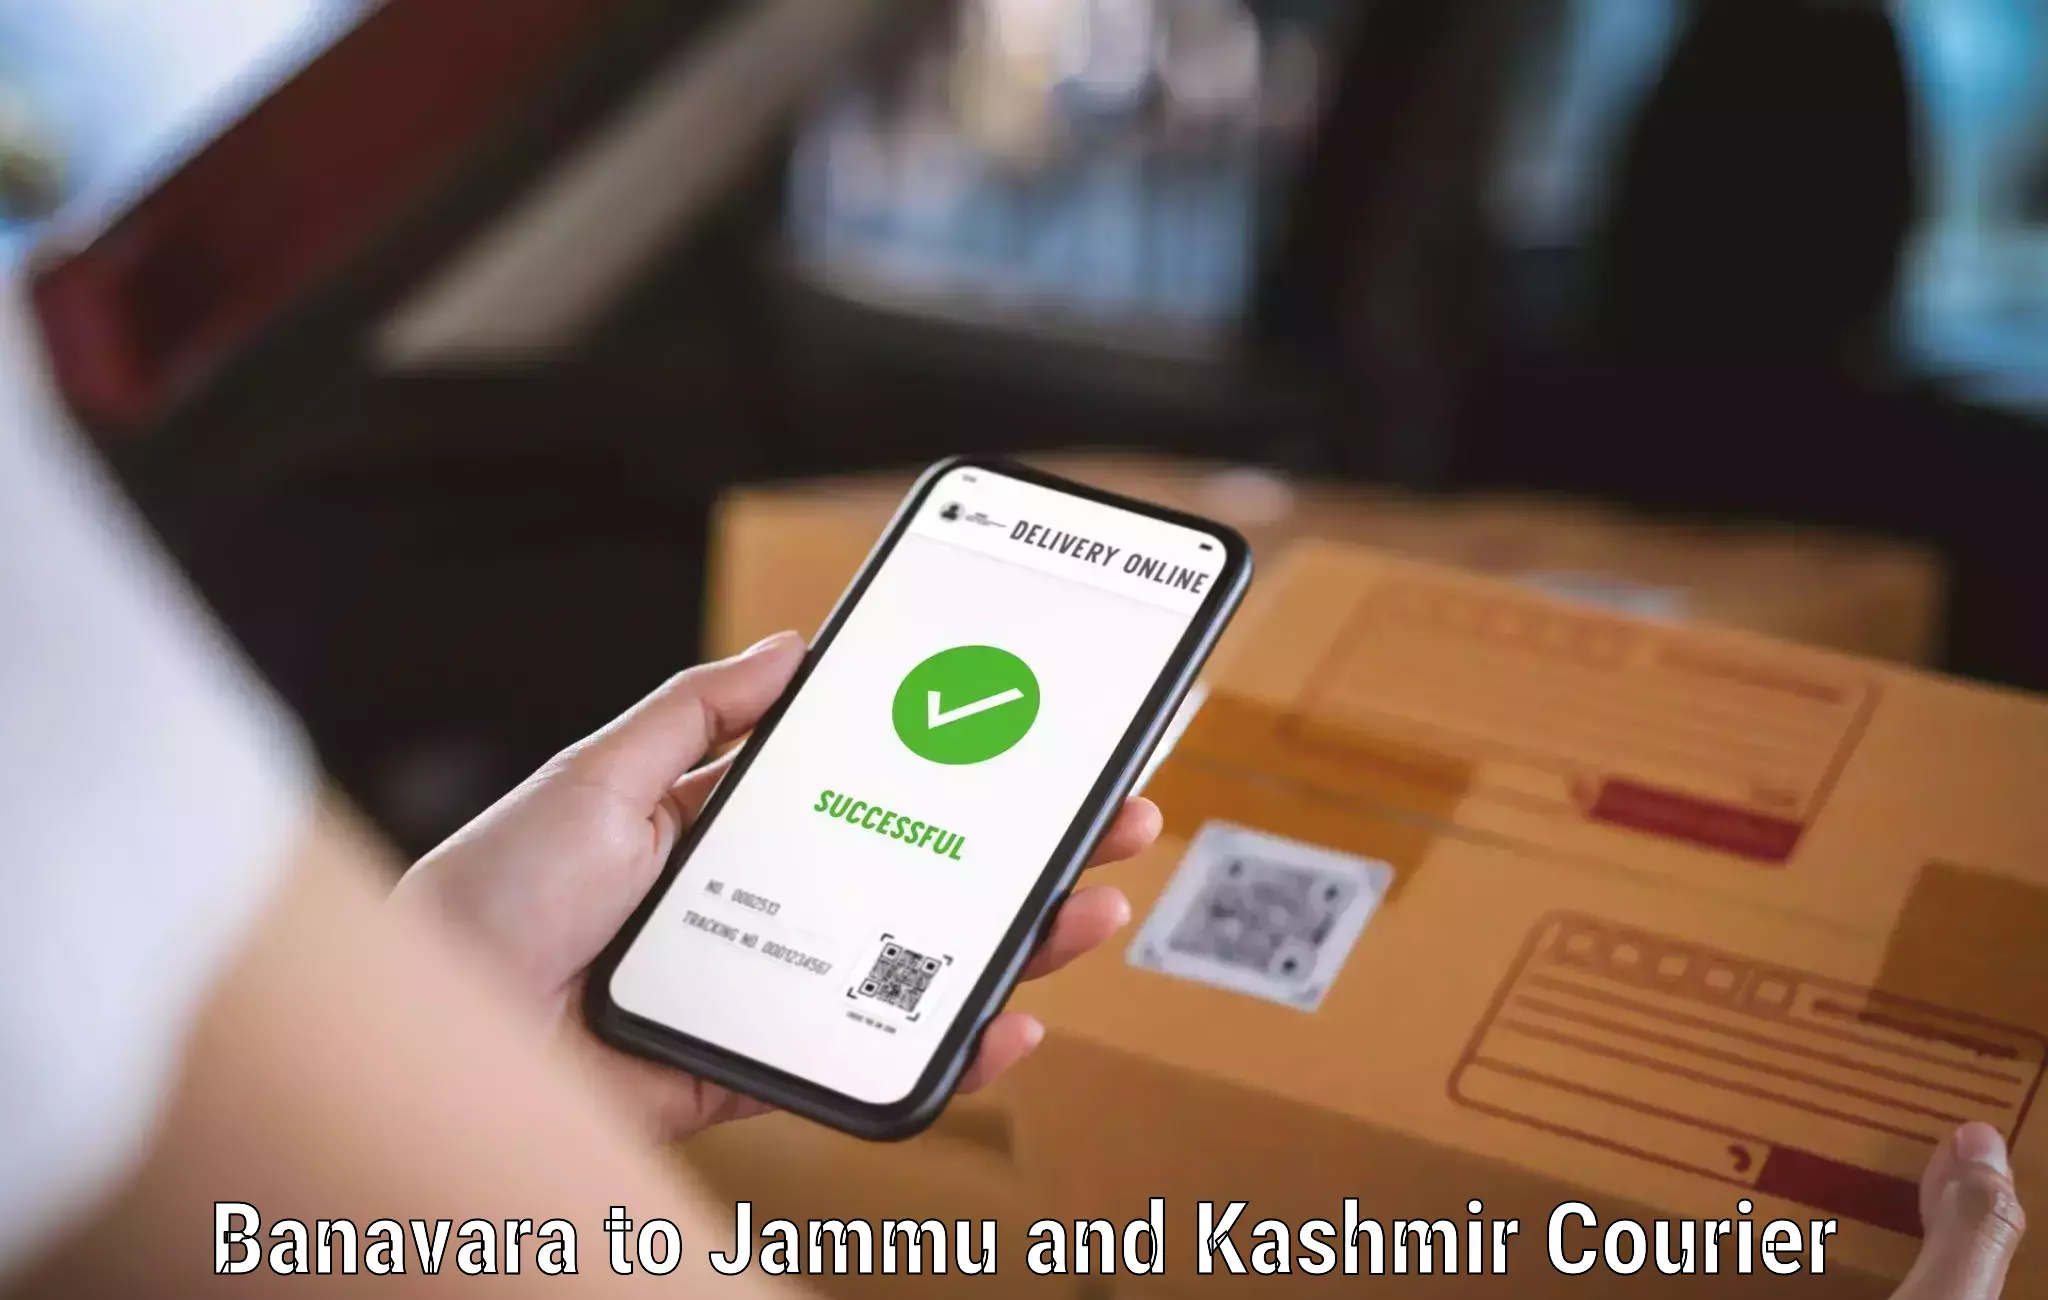 Flexible delivery schedules Banavara to Pulwama